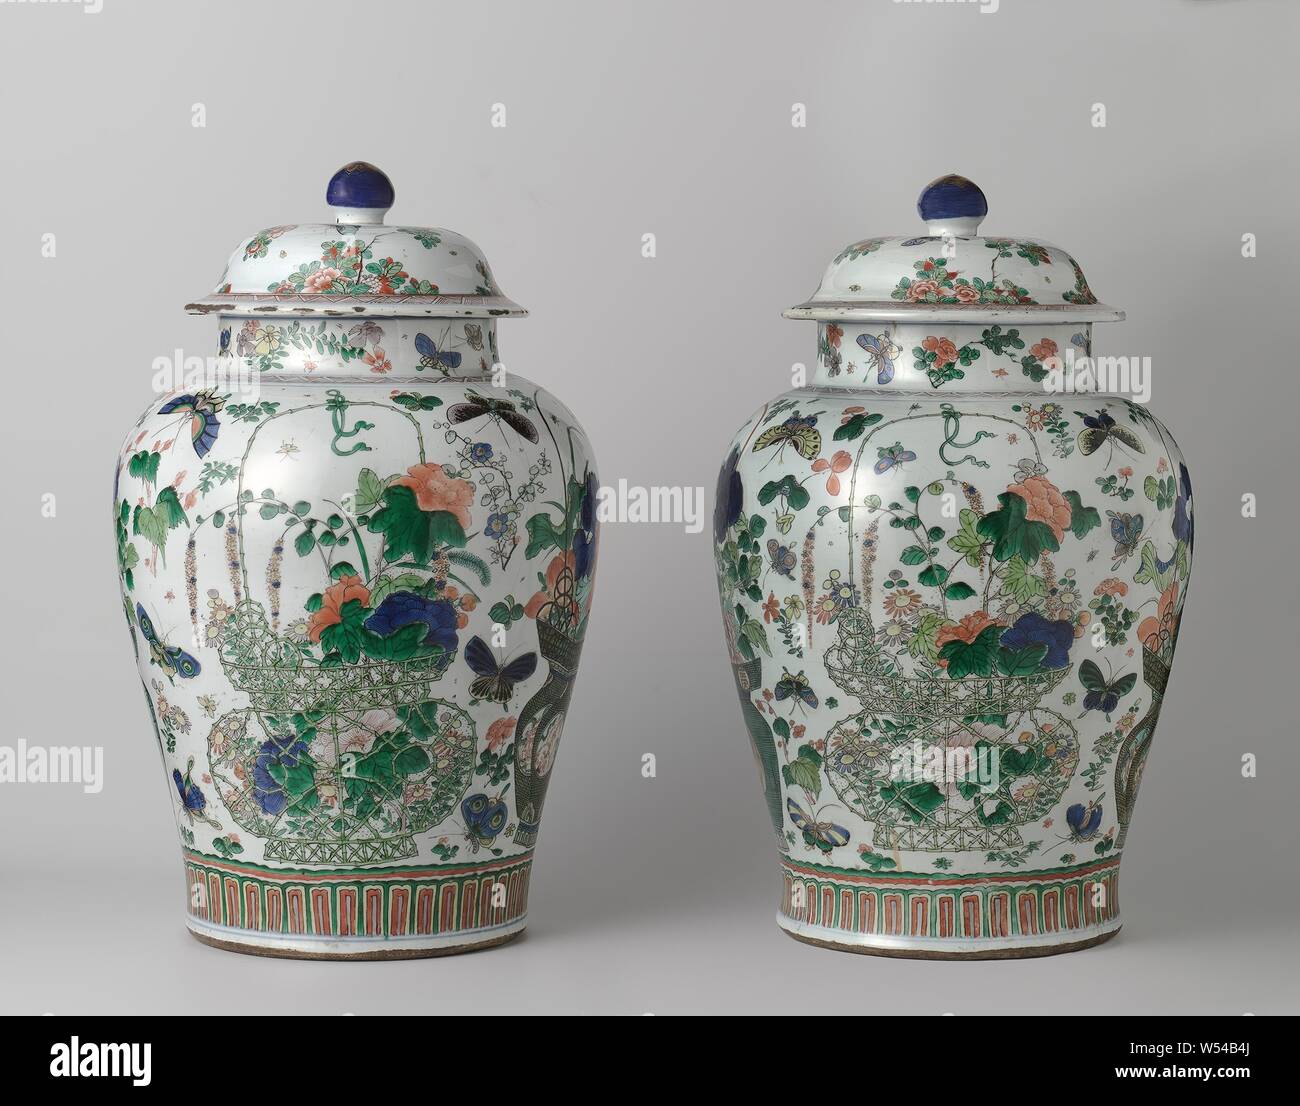 Baluster covered jar with flower baskets, flower sprays and insects, Baluster-shaped porcelain covered pot, painted on the glaze in blue, red, green, yellow, aubergine, black and gold. On the belly four times a flower basket with aster, peony, prunus, blue rain, lotus, chrysanthemum and iris. One basket with shishi and ruyi motifs and one basket with feng huangs and Chinese characters. Separate flower sprays and insects between the baskets. Above the foot a band with stylized leaf motifs. On the shoulder a strap with hatching. The neck with flower sprays and butterflies. A crack in the rim Stock Photo